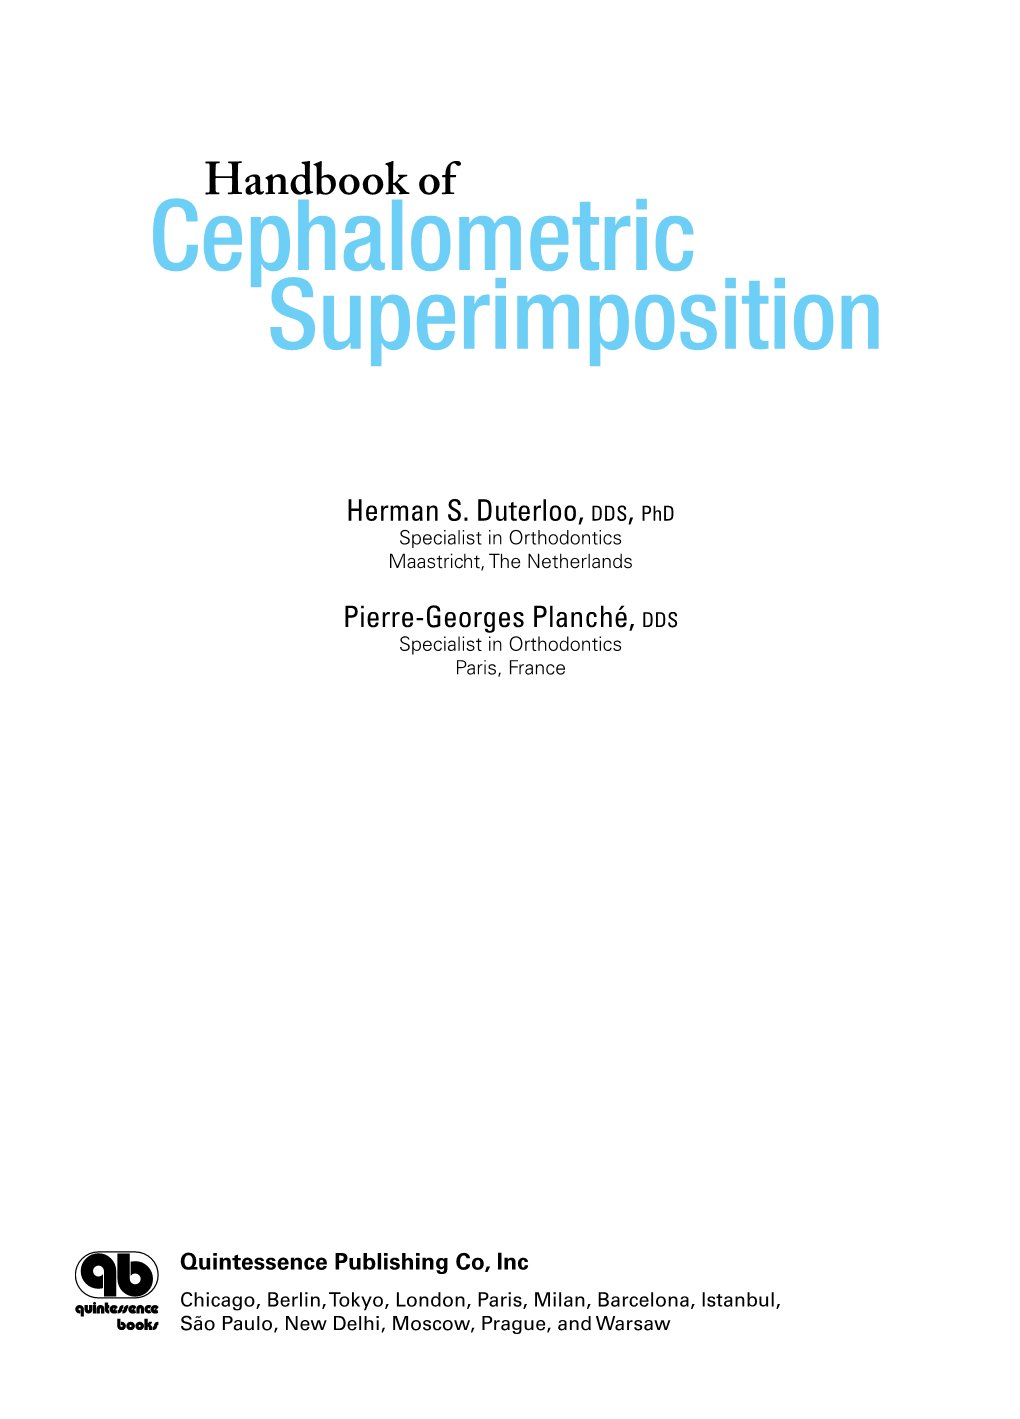 Cephalometric Superimposition Helps the 50 Years Ago